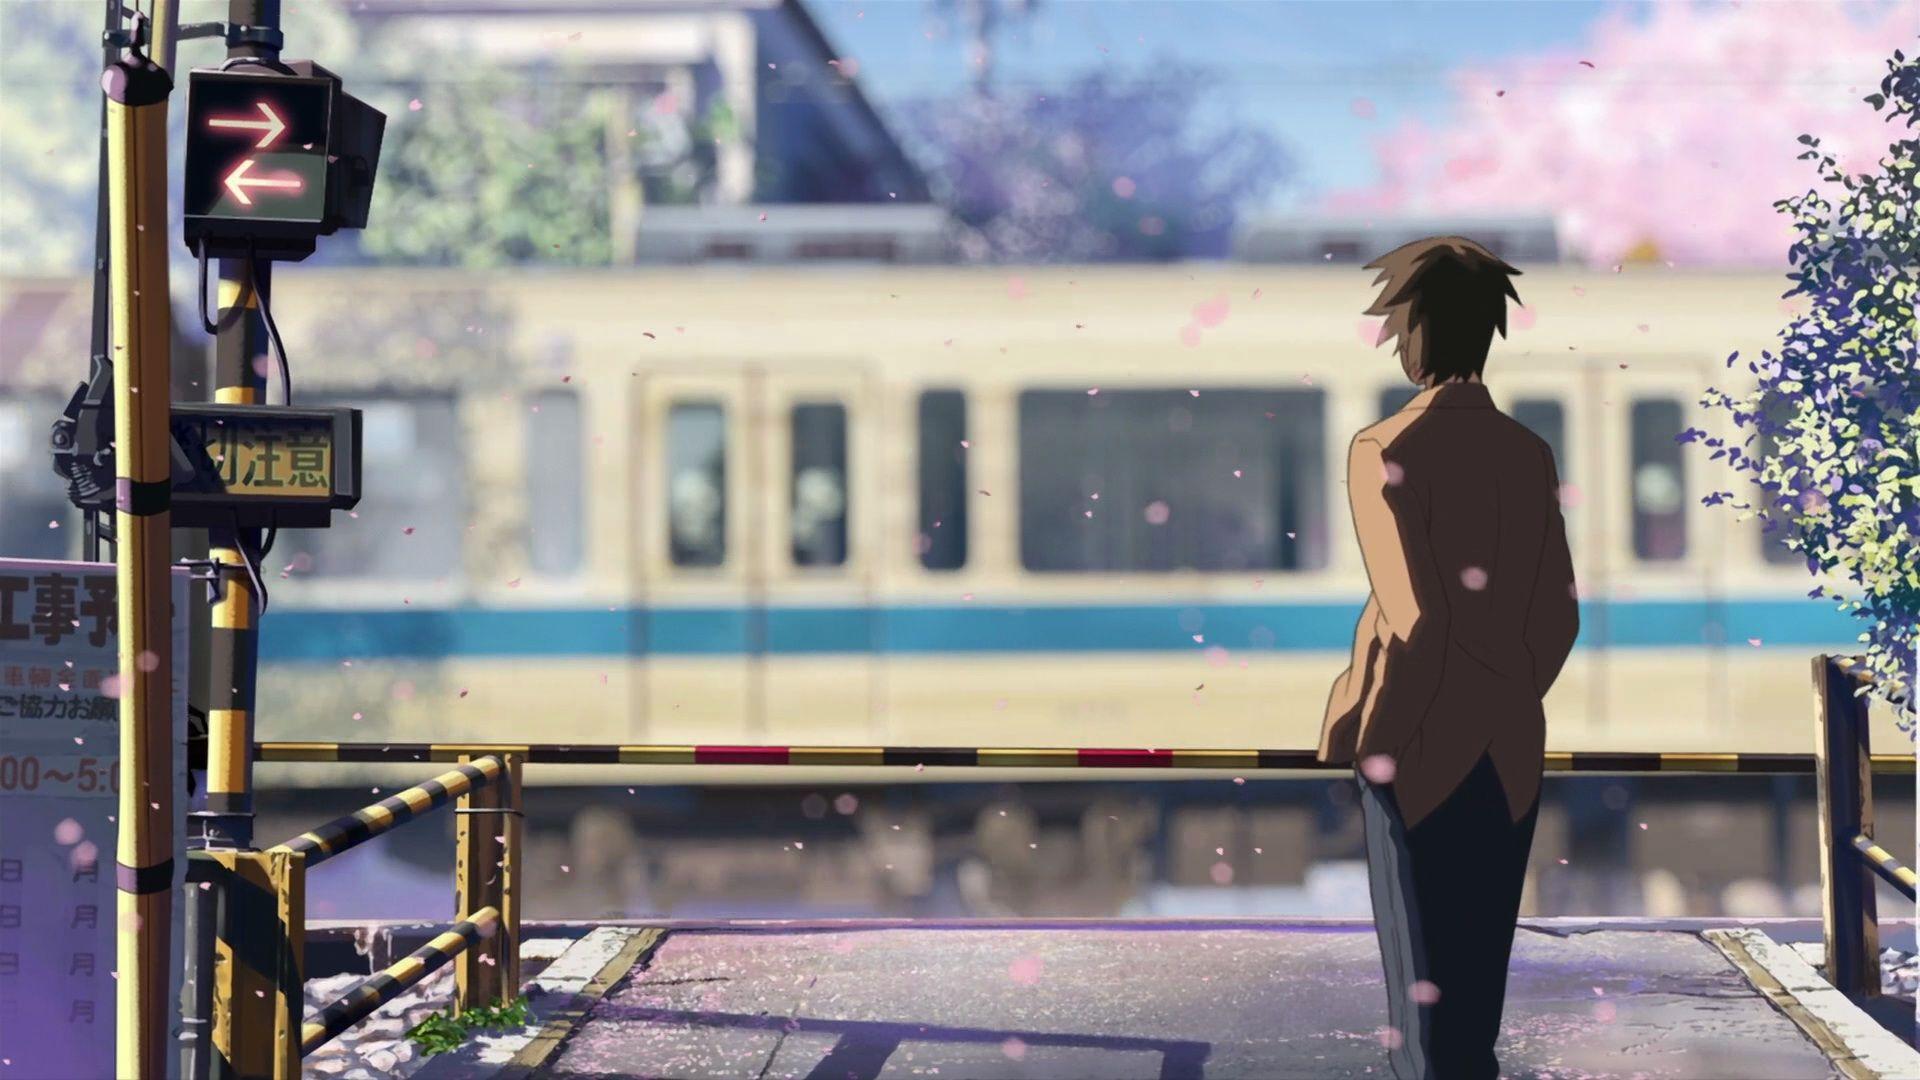 Anime Train Wallpapers Top Free Anime Train Backgrounds Wallpaperaccess There are 34 anime train scenery for sale on. anime train wallpapers top free anime